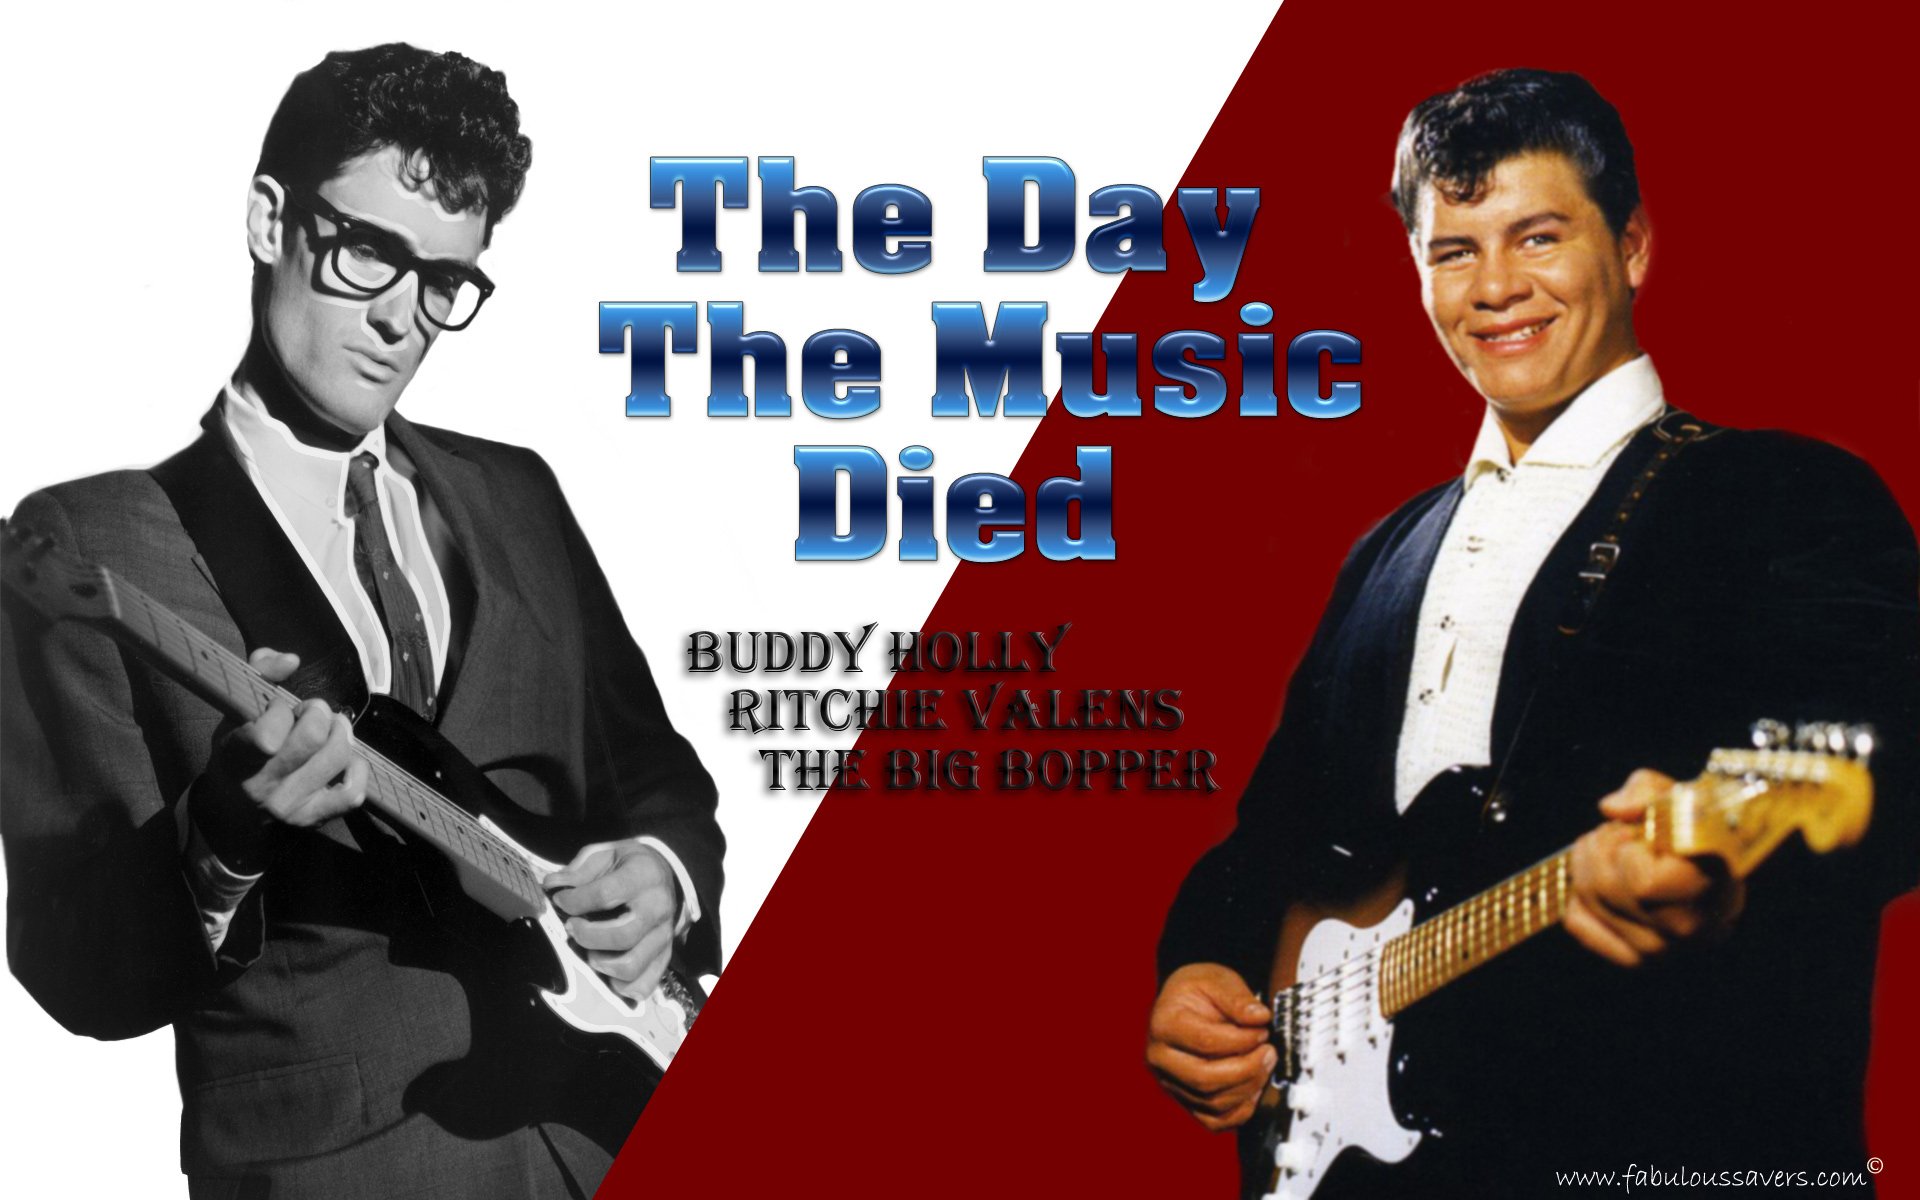 who wrote the song buddy holly